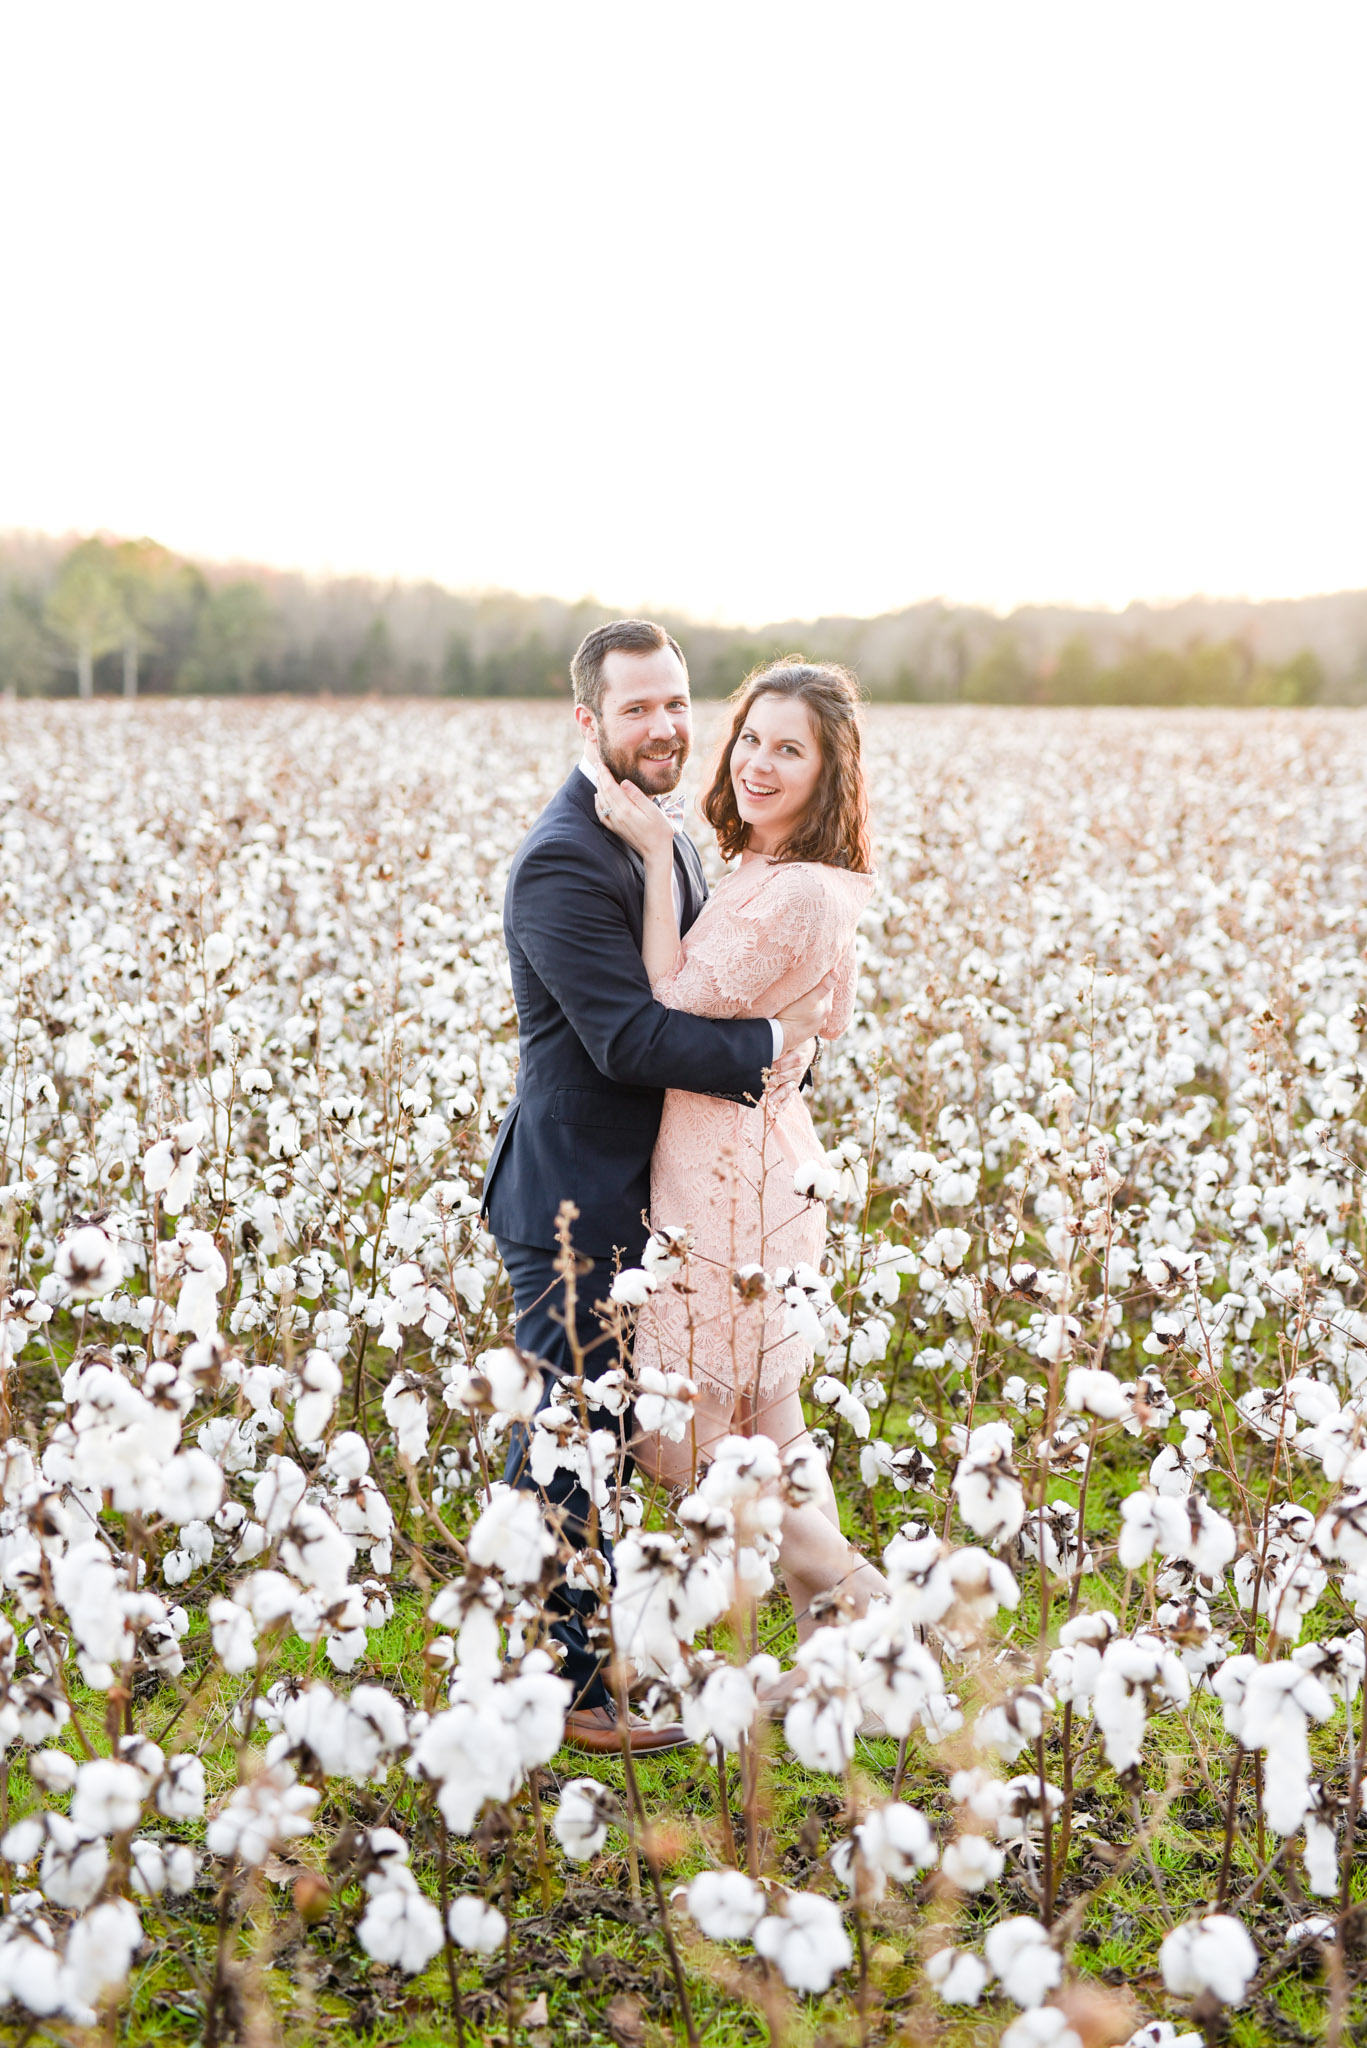 Couple laughs in cotton field.